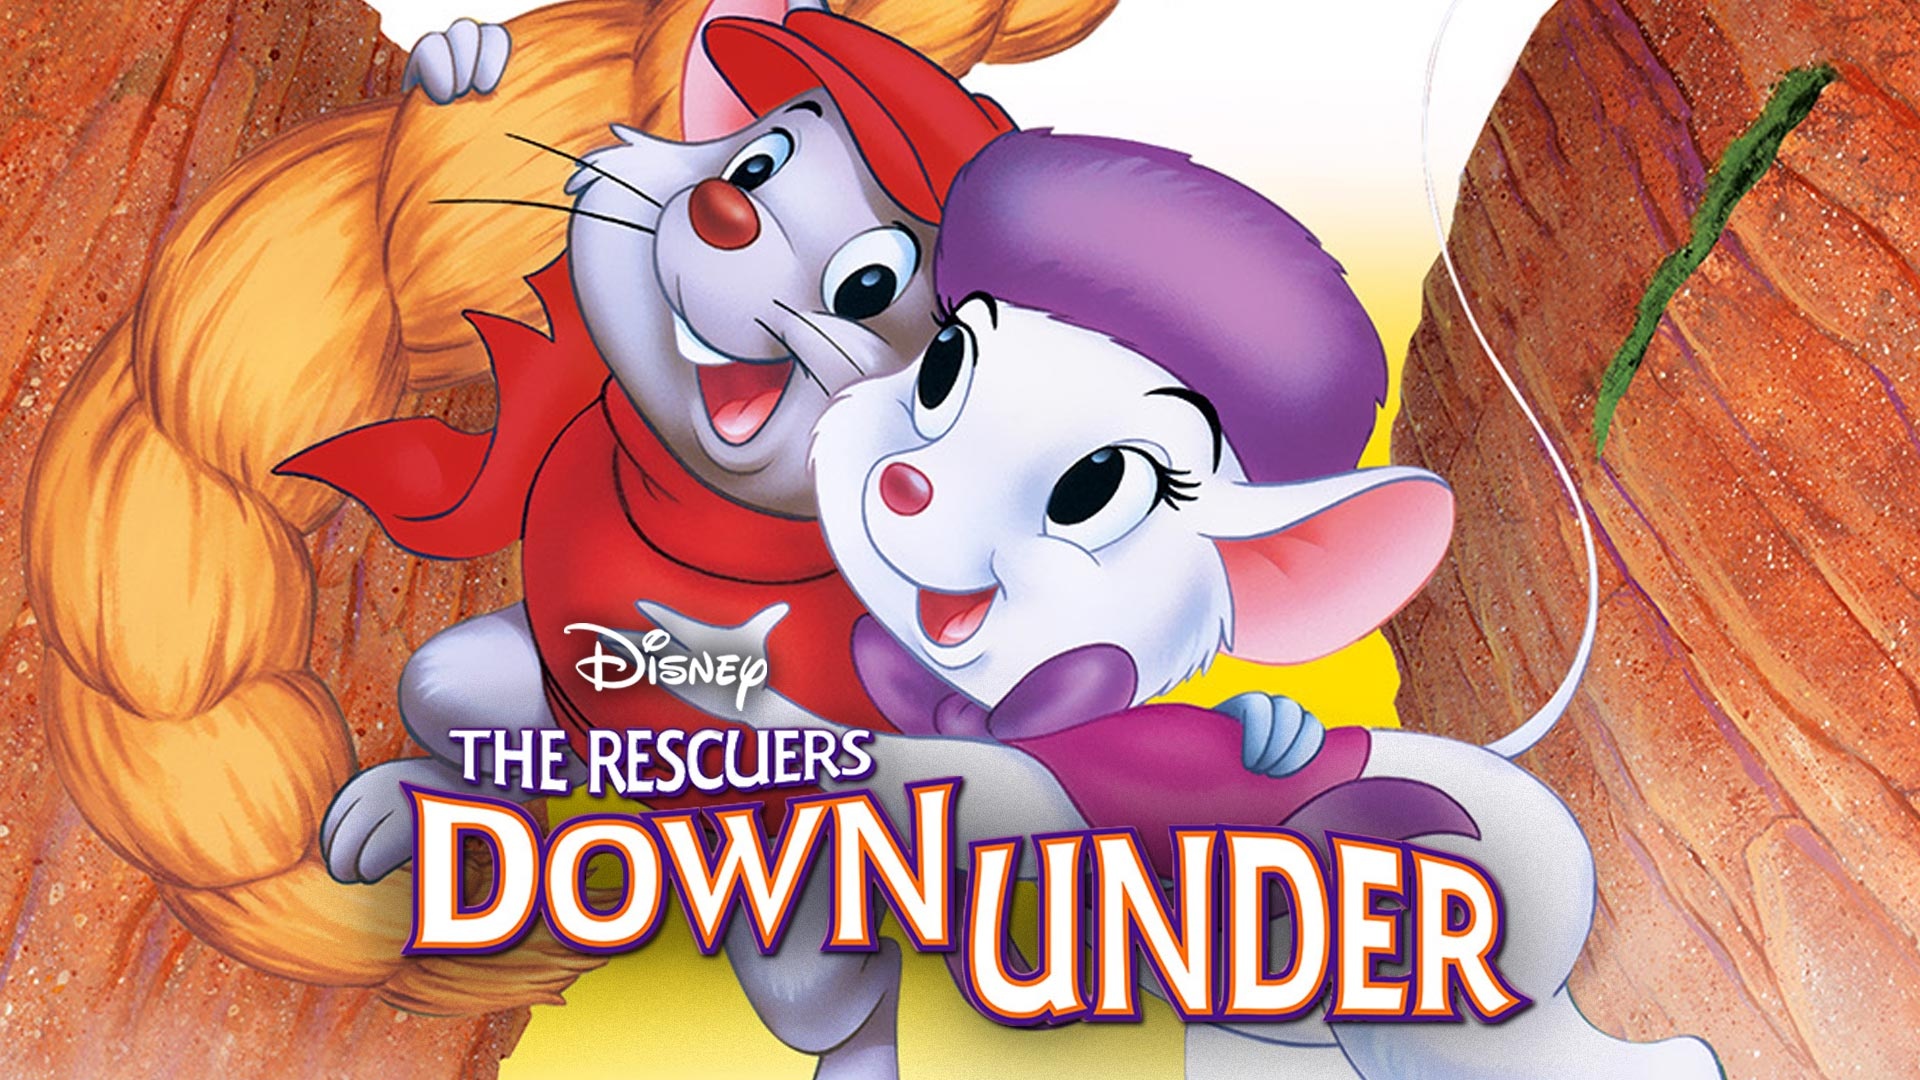 The Rescuers Down Under, Rescuing wildlife, Exciting animated film, Radio Times, 1920x1080 Full HD Desktop